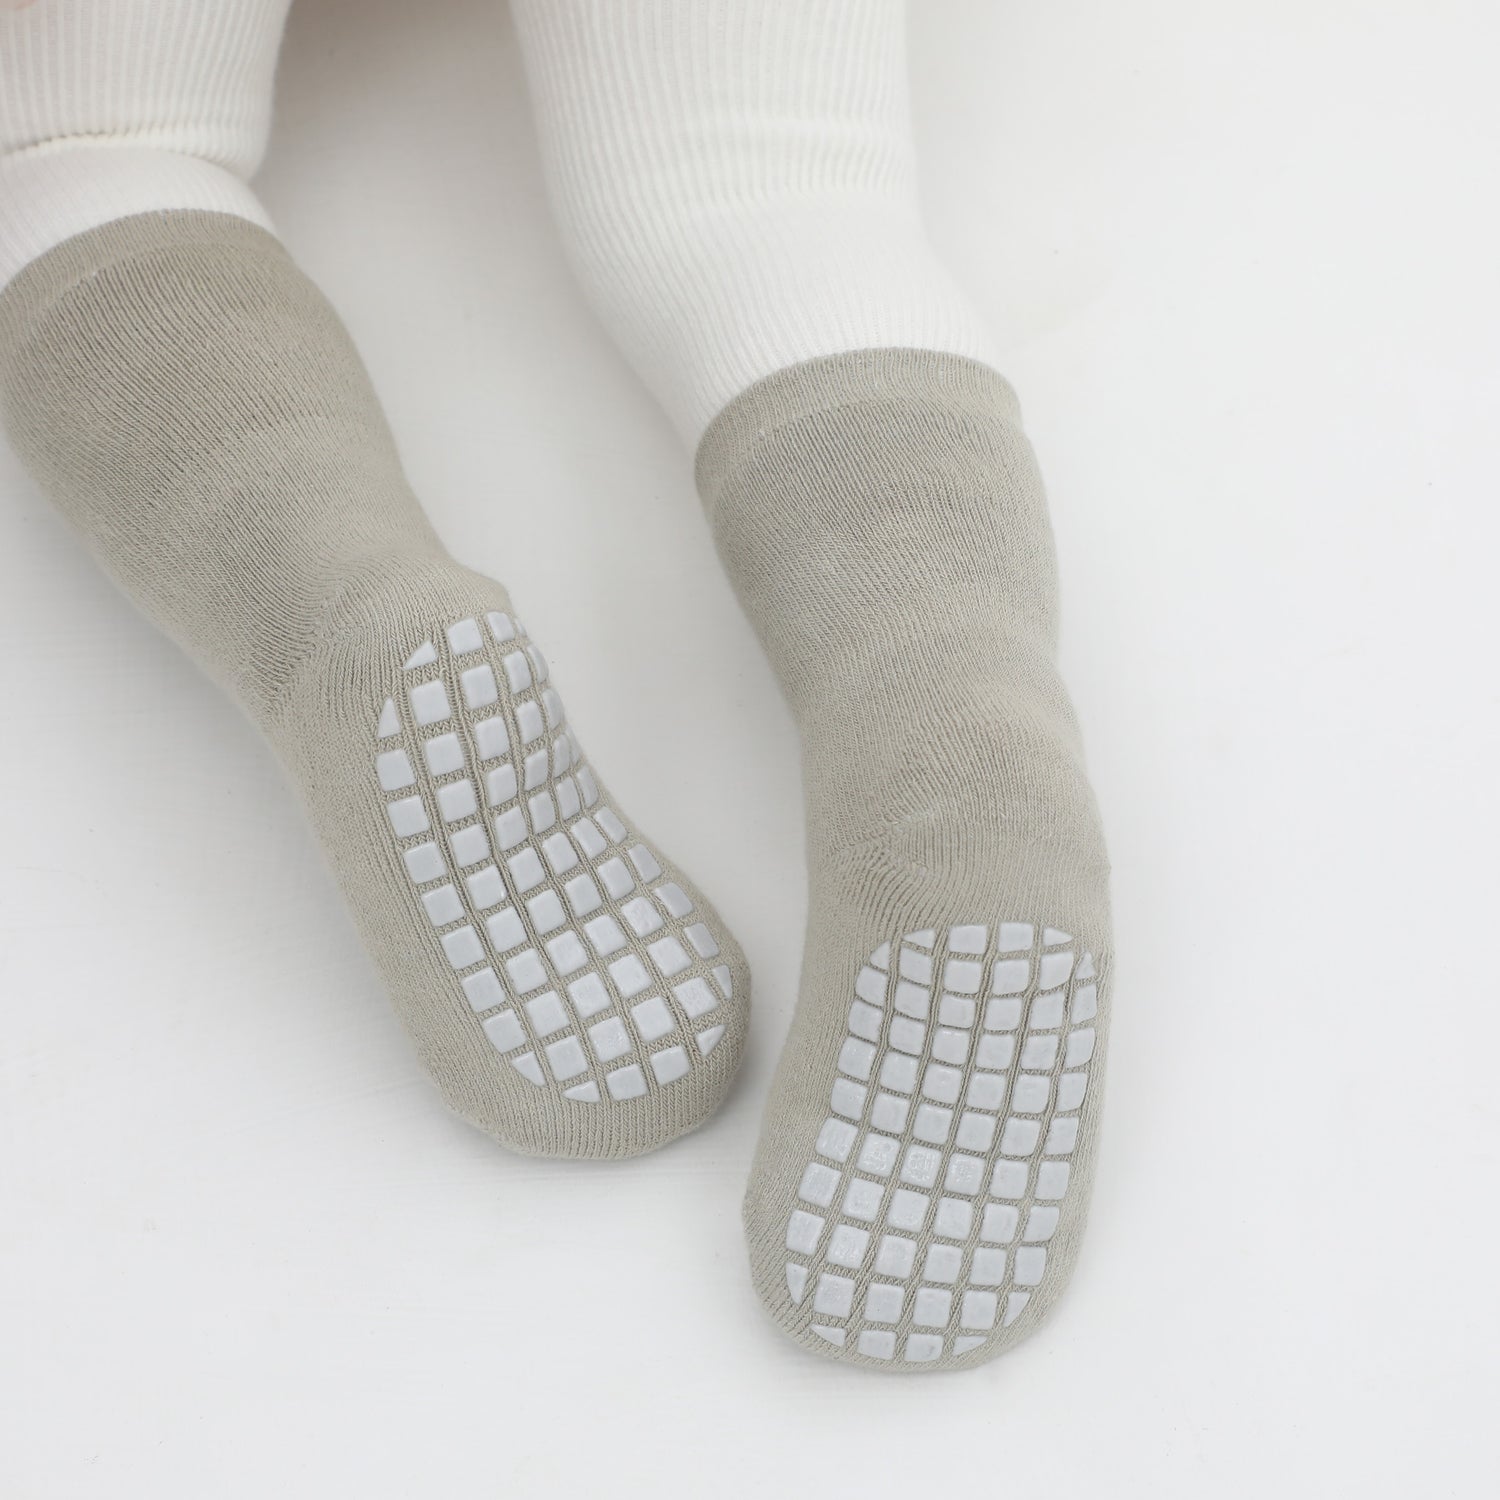 Infant boy's grip socks for both safety and fun.